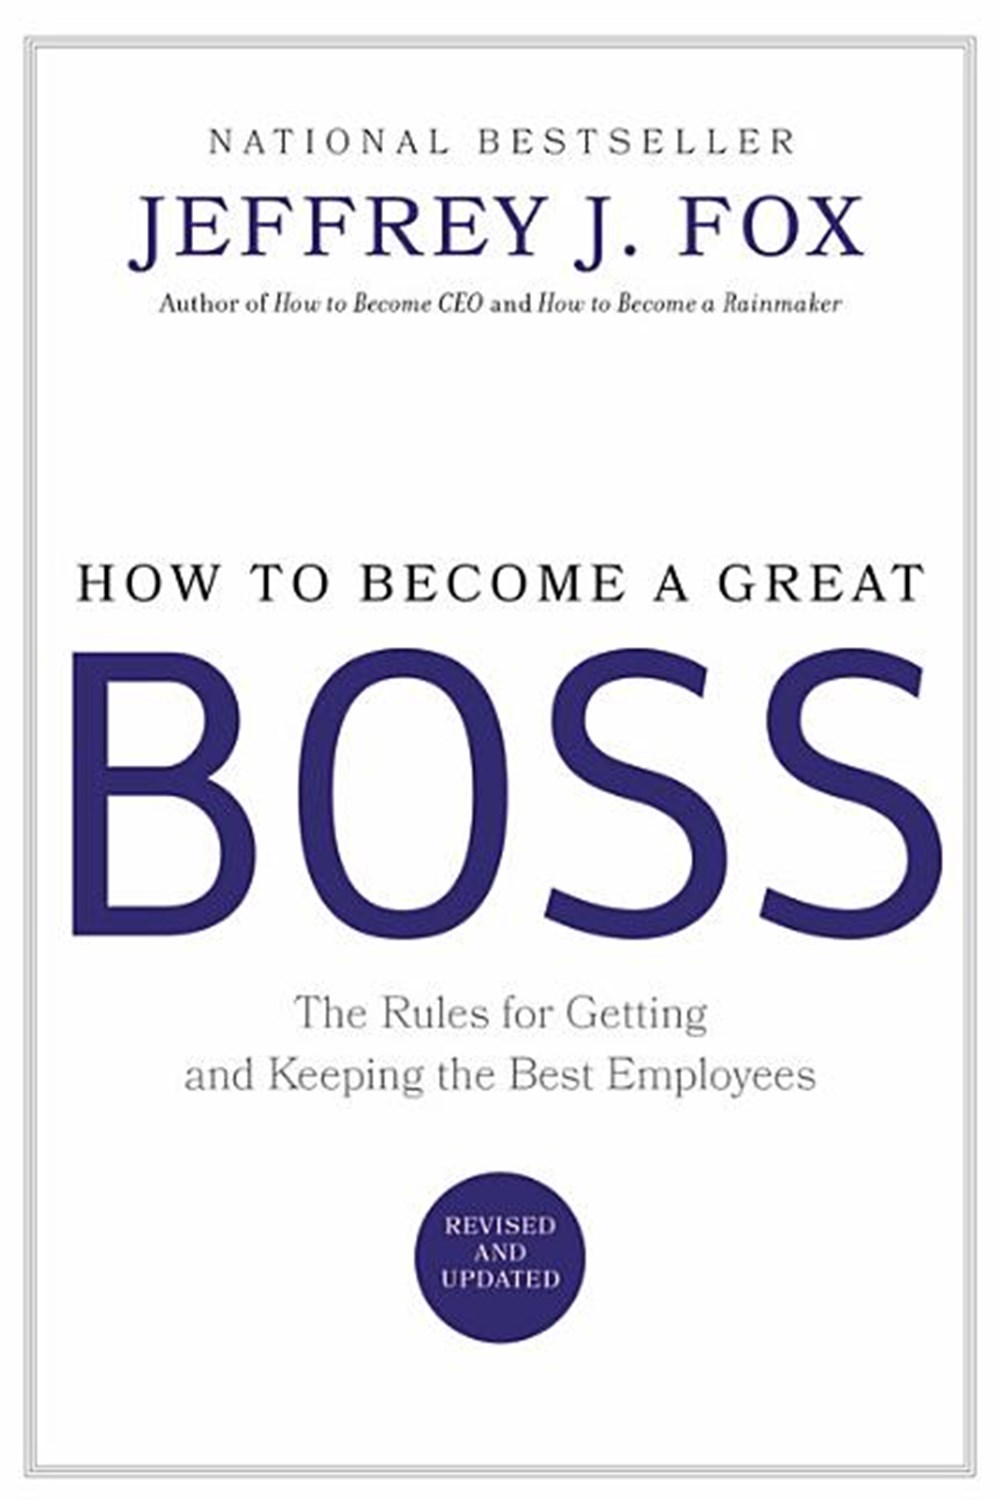 How to Become a Great Boss The Rules for Getting and Keeping the Best Employees